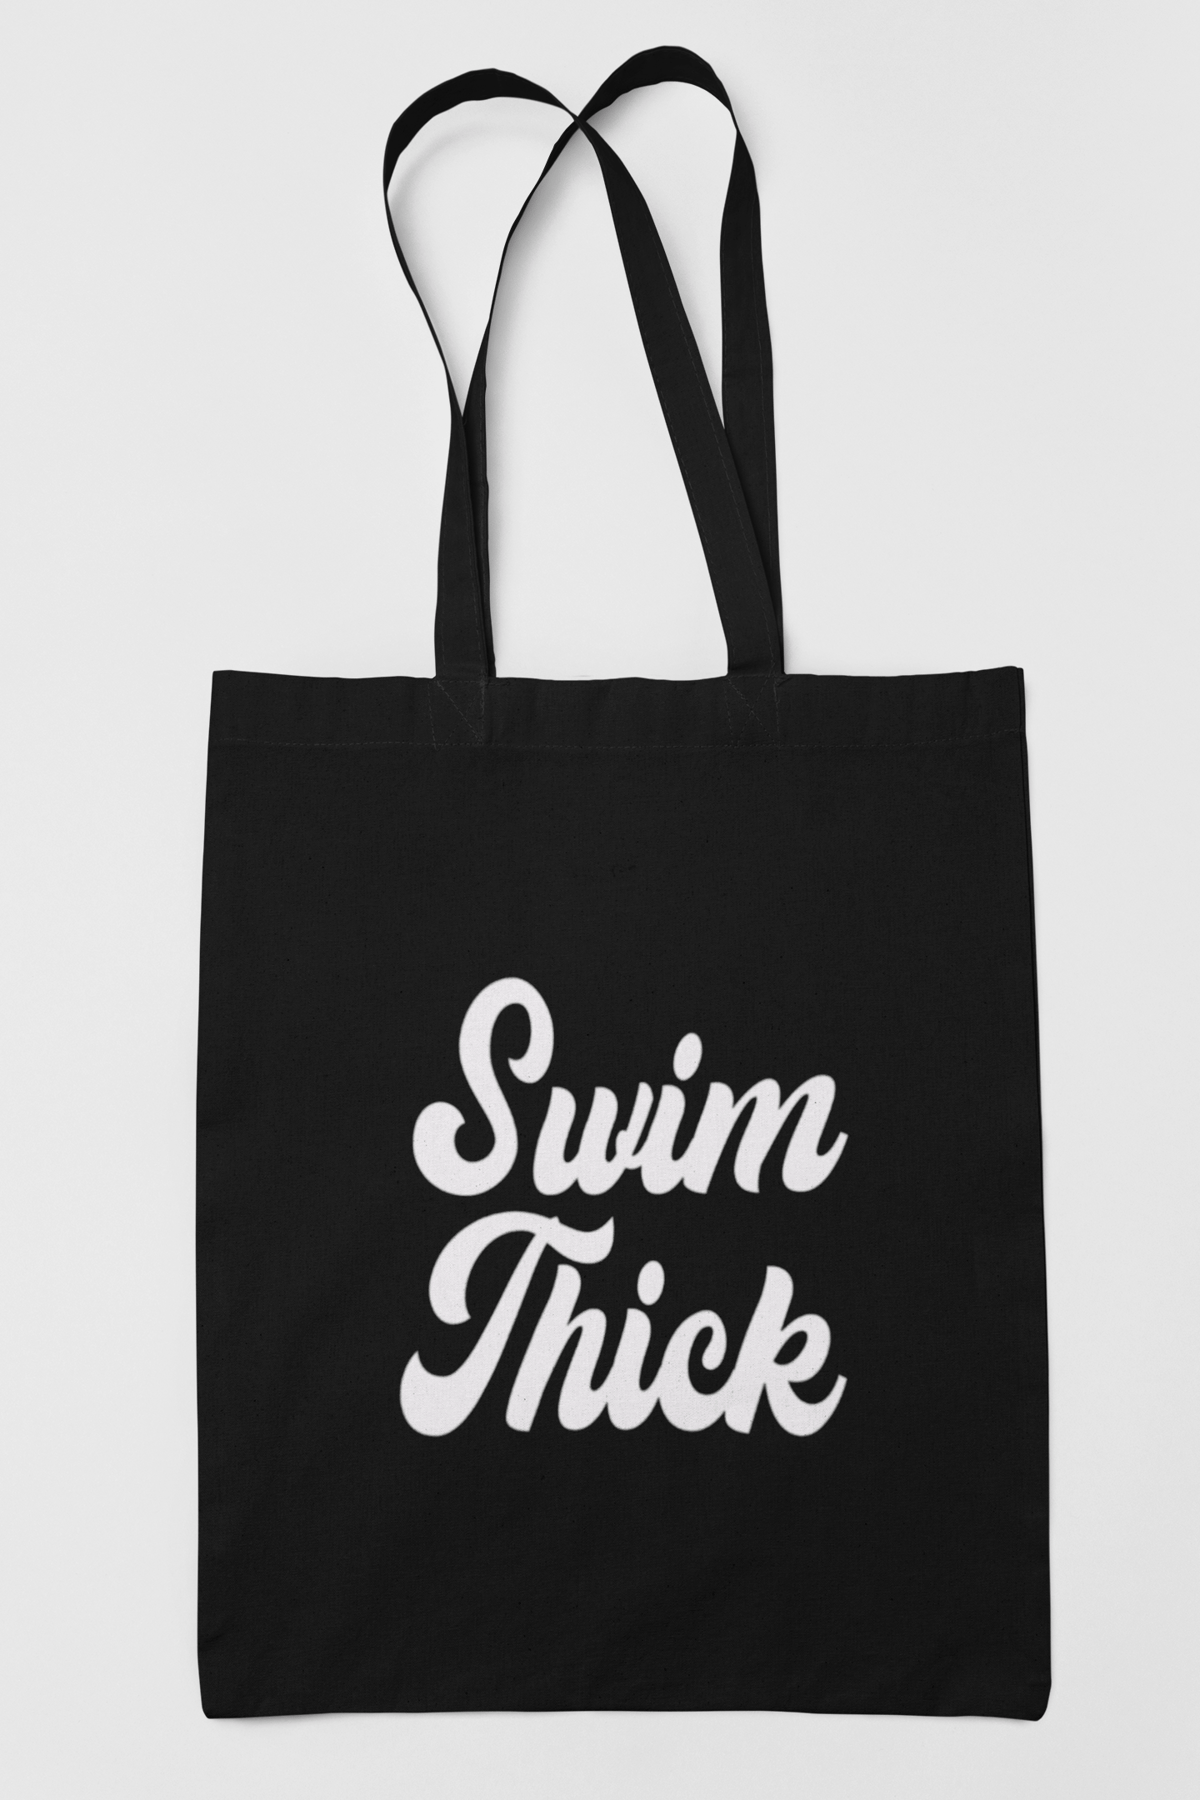 SWIM THICK MERCH THE DIVA KURVES COLLECTION